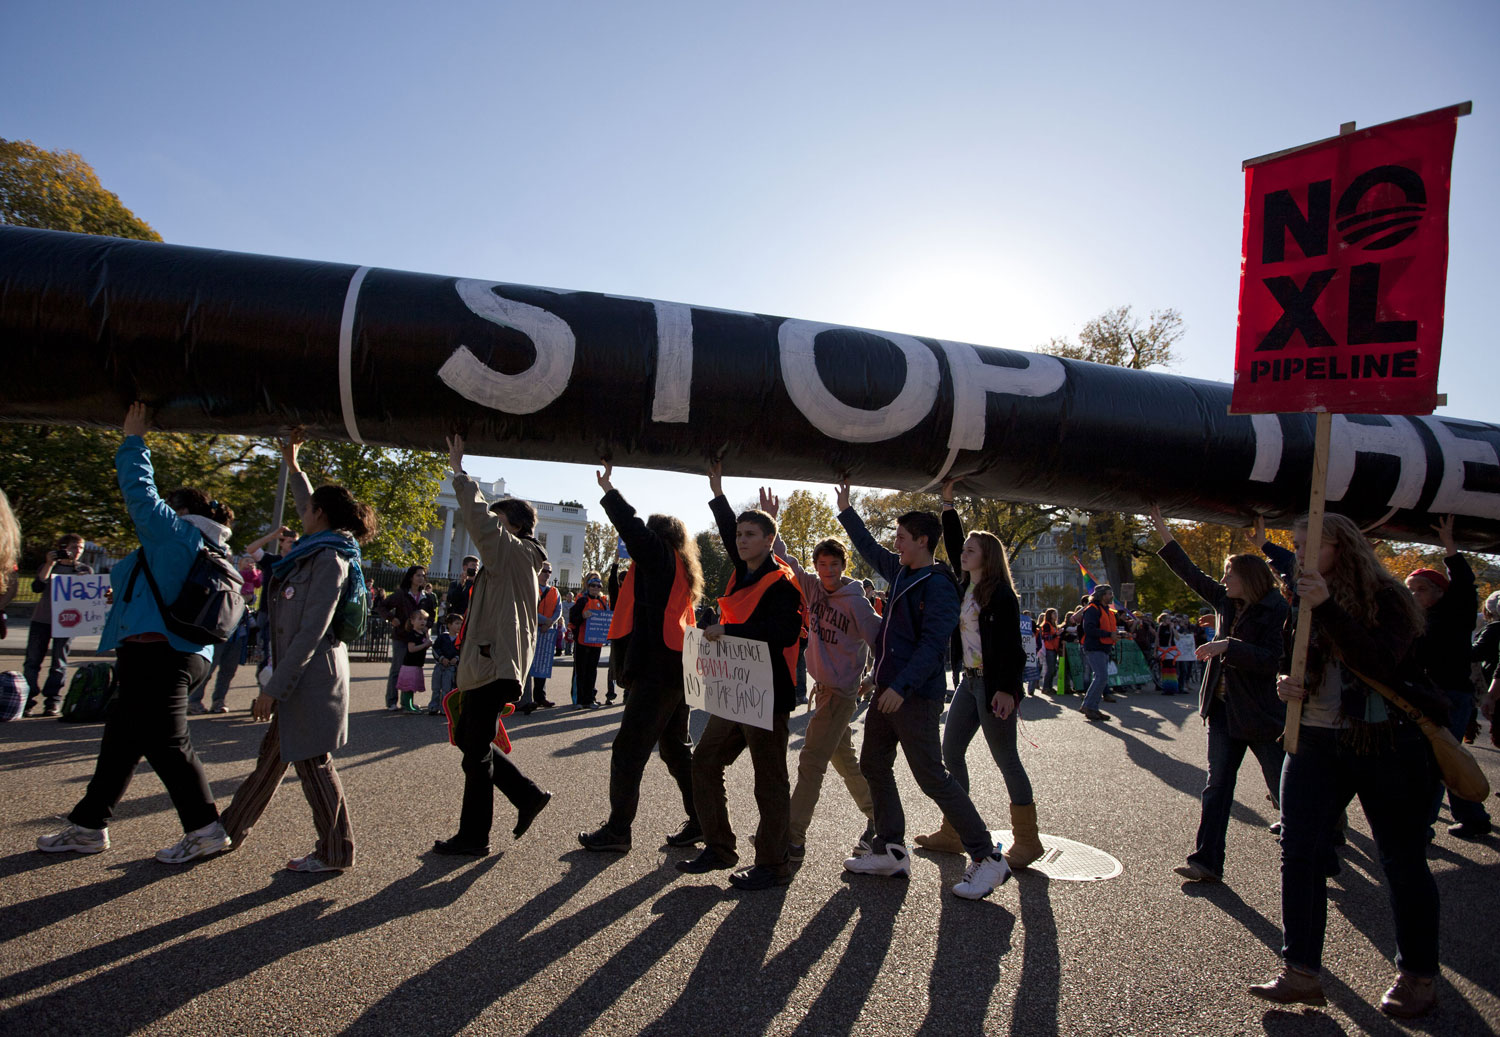 Could Working on Keystone XL Give You Cancer, Asthma?